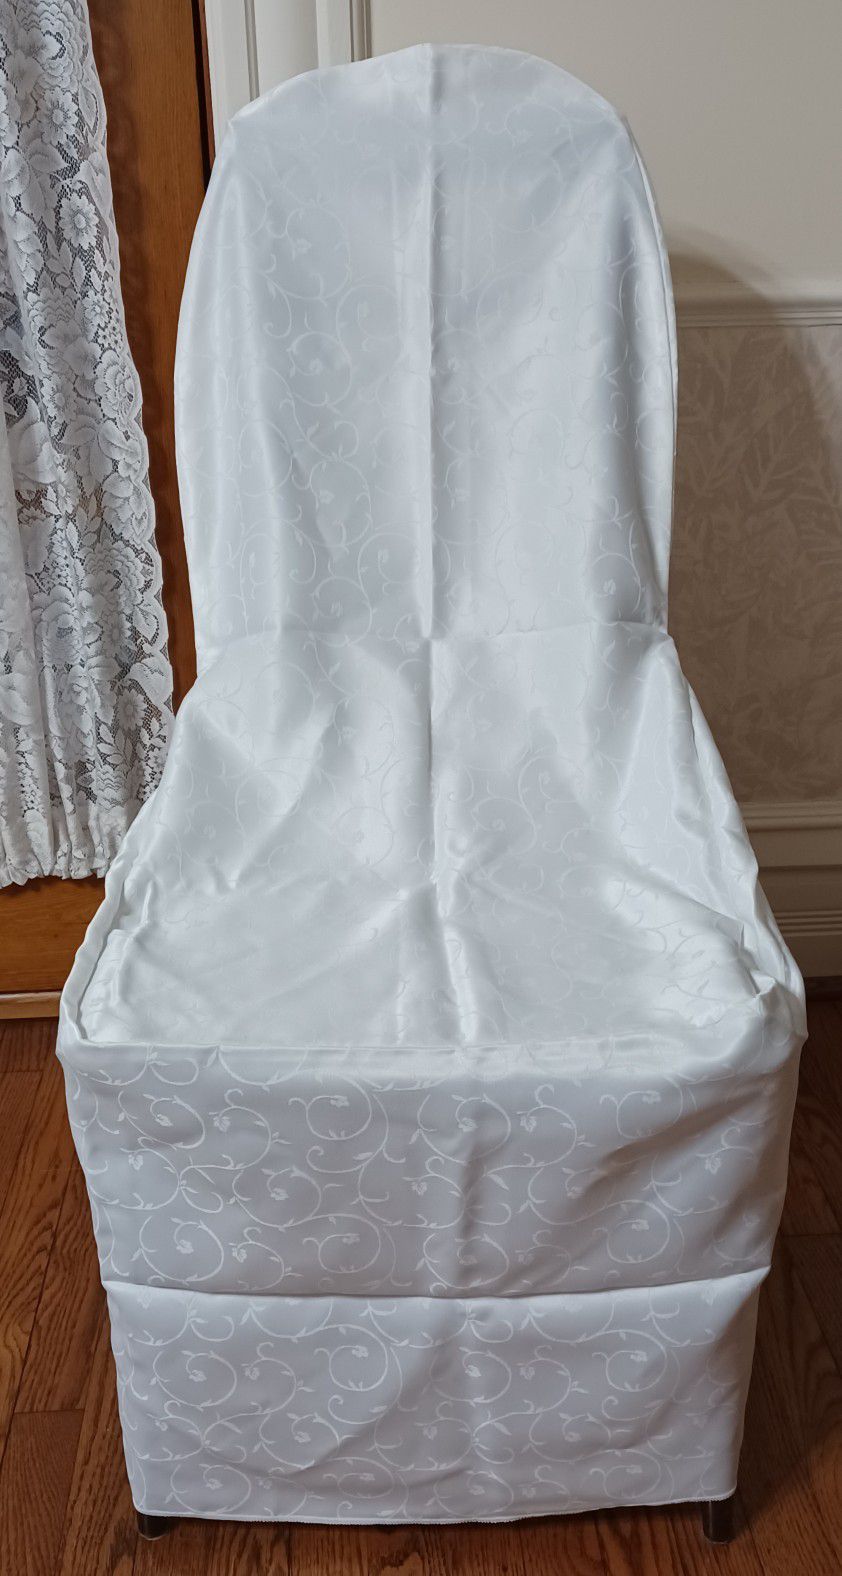 Chair Covers, White Patterned Satin , $3.50 Each, Six Total